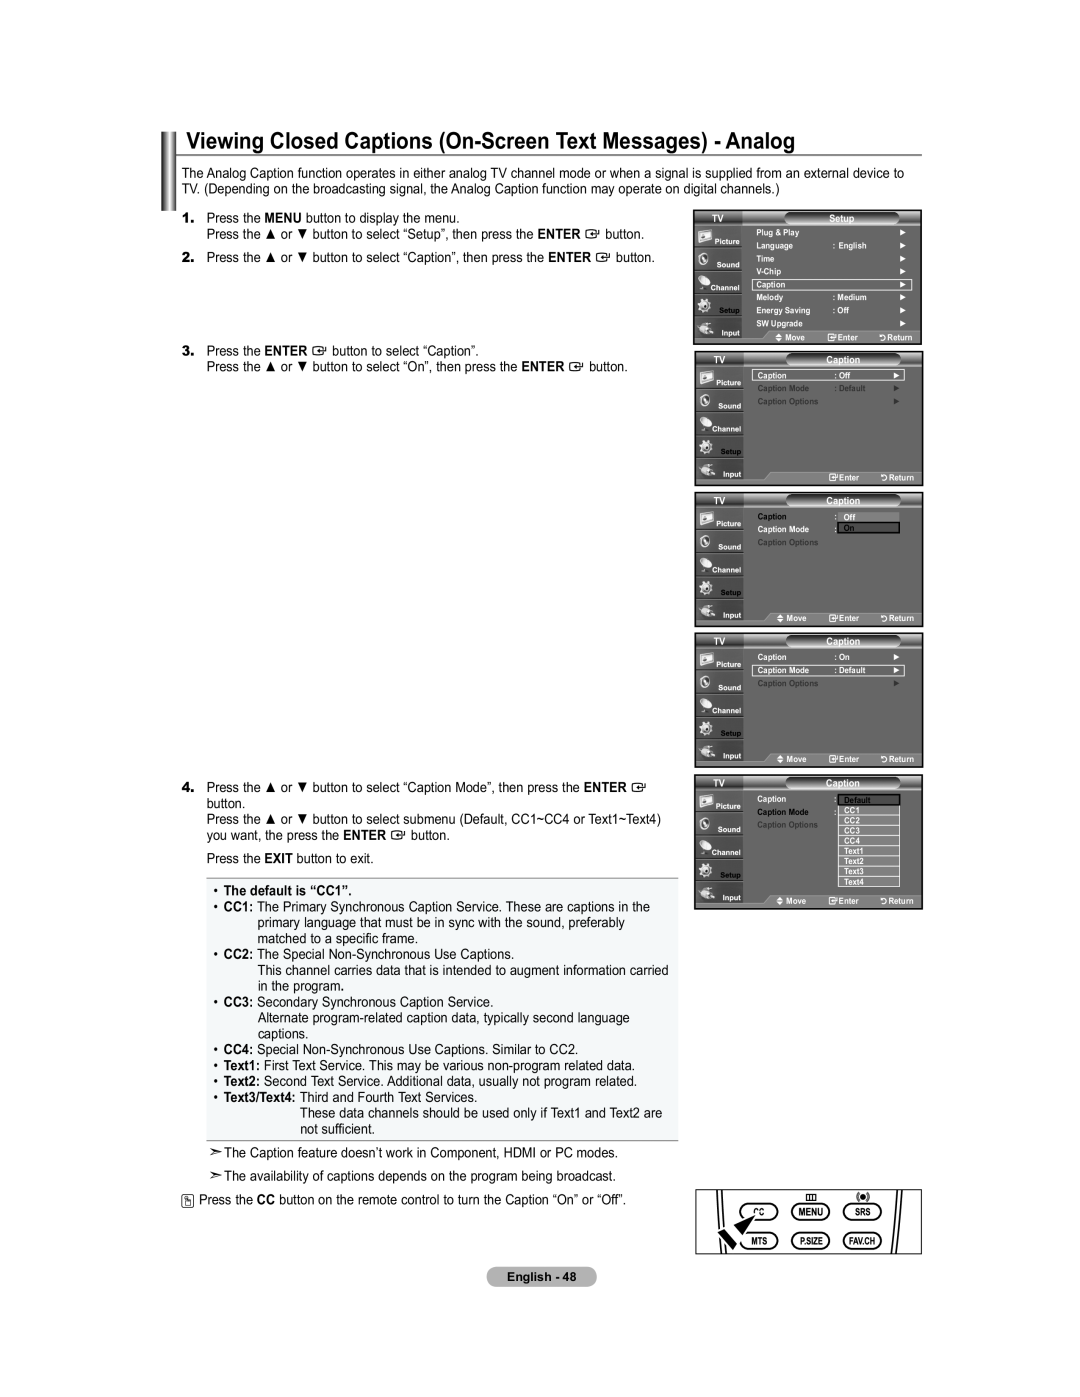 Samsung 451 user manual Viewing Closed Captions On-Screen Text Messages - Analog, Enter, The default is “CC1” 